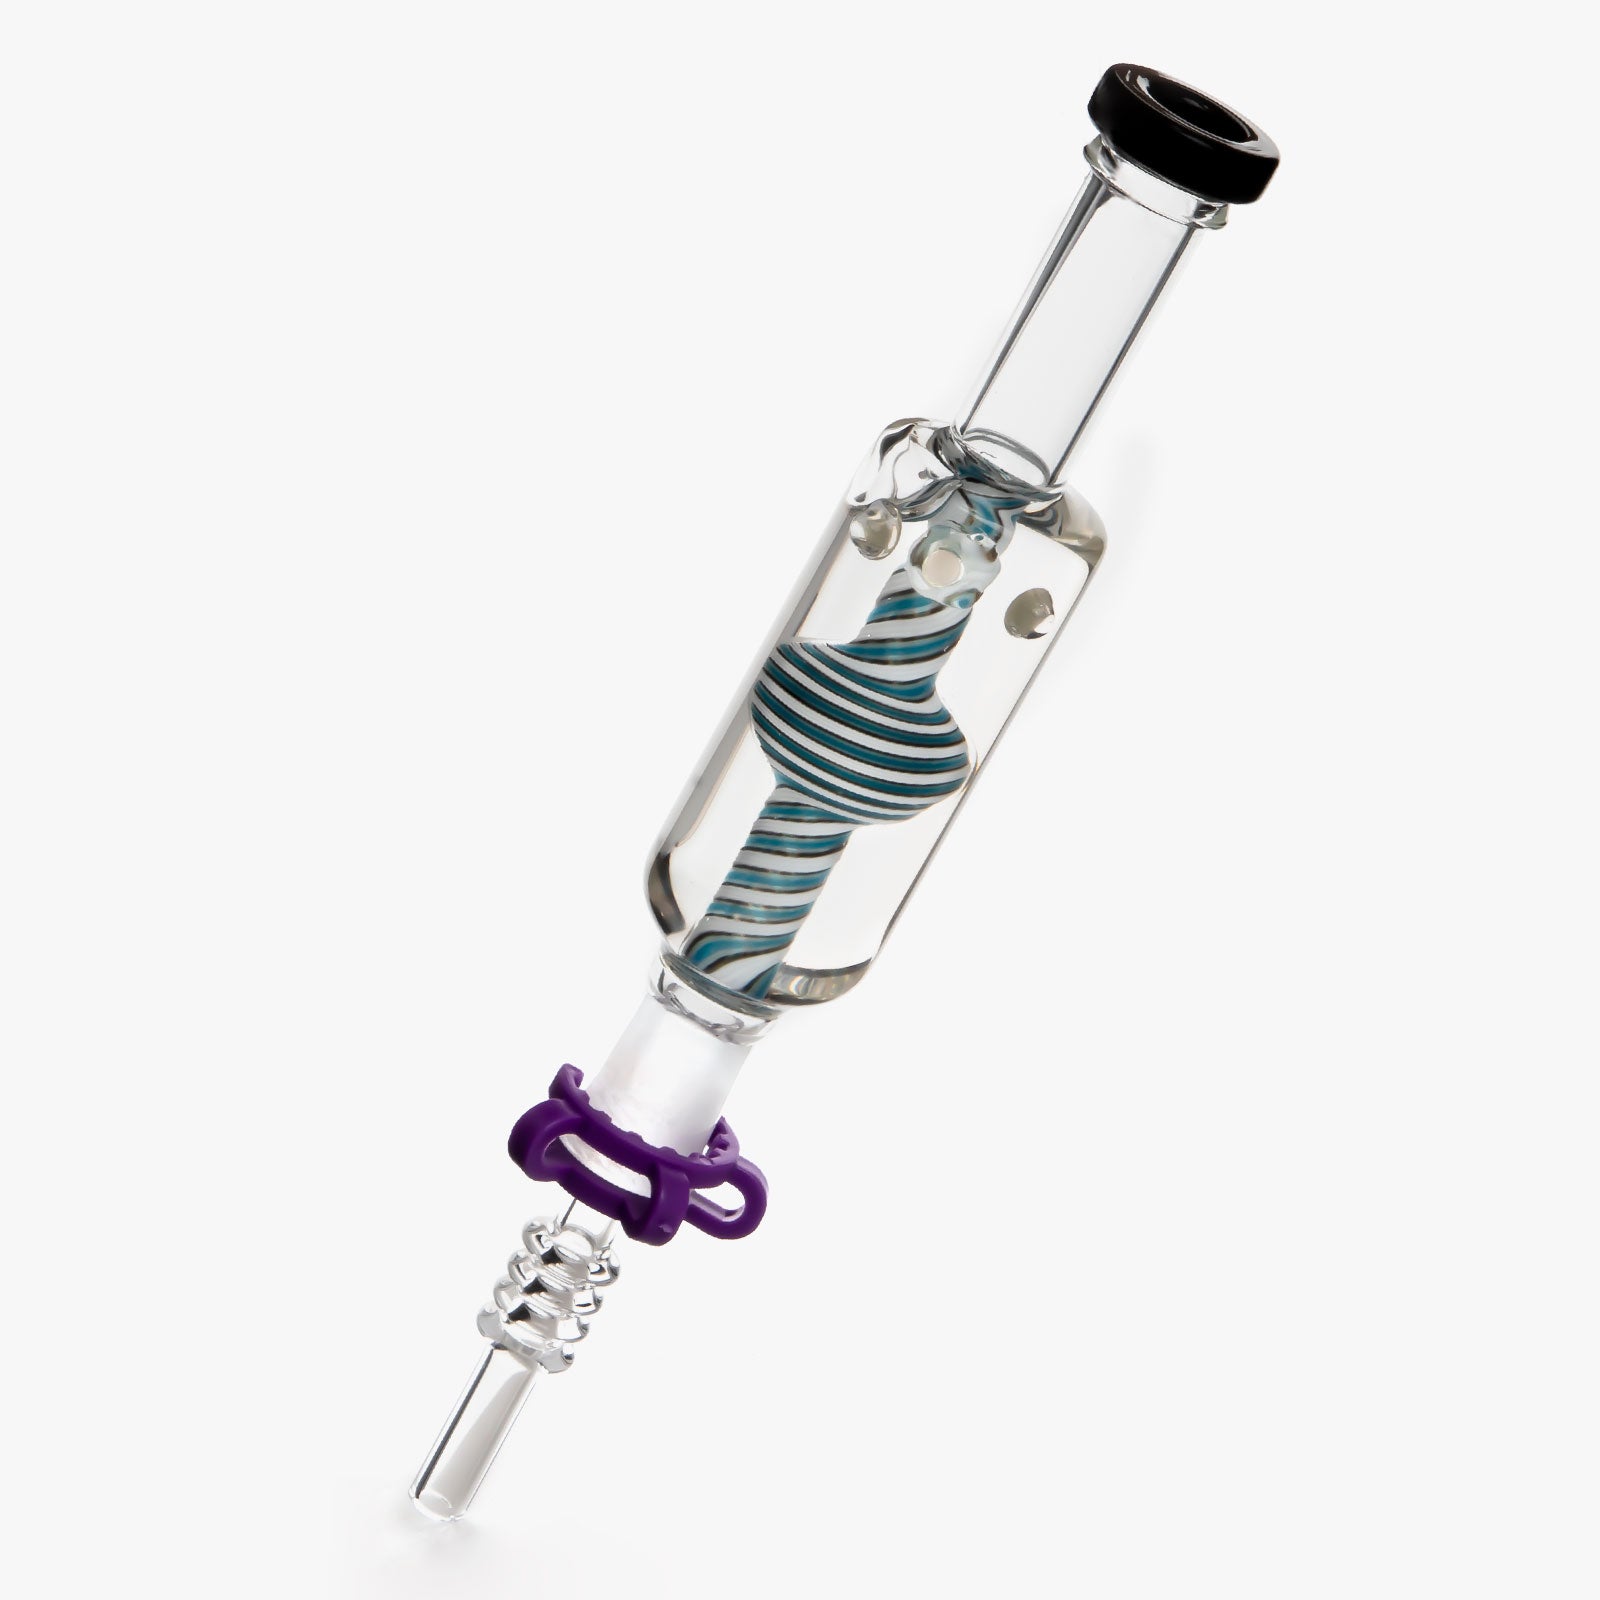 Freeze Nectar Collector Kit: Frozen Glycerin Dab Straw - Black and Red -  Quartz Banger